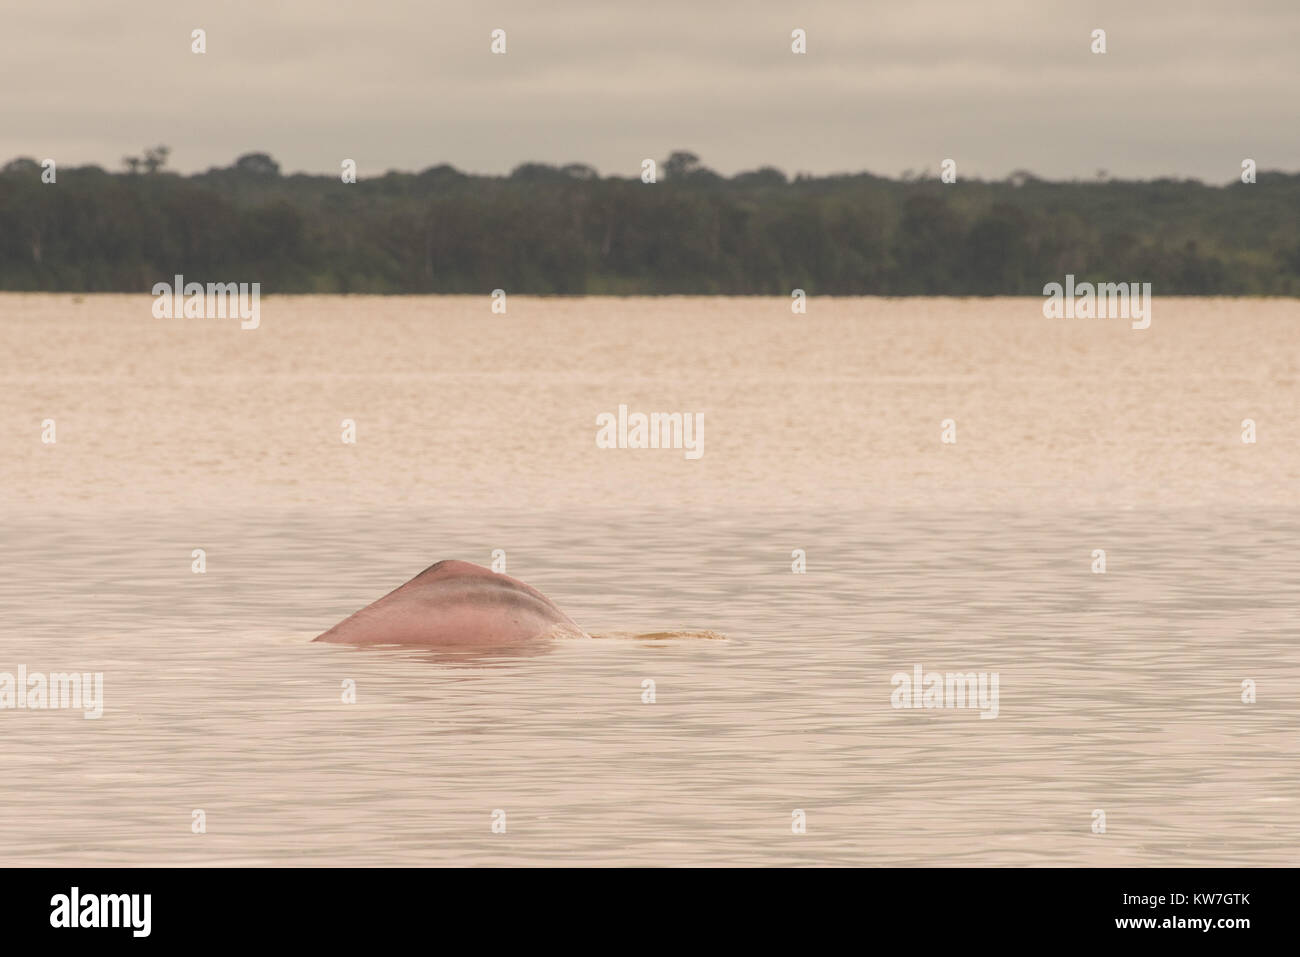 A rare pink dolphin surfaces in the Amazon river, unlike most dolphins this species is freshwater and spends its whole life in rivers. Stock Photo